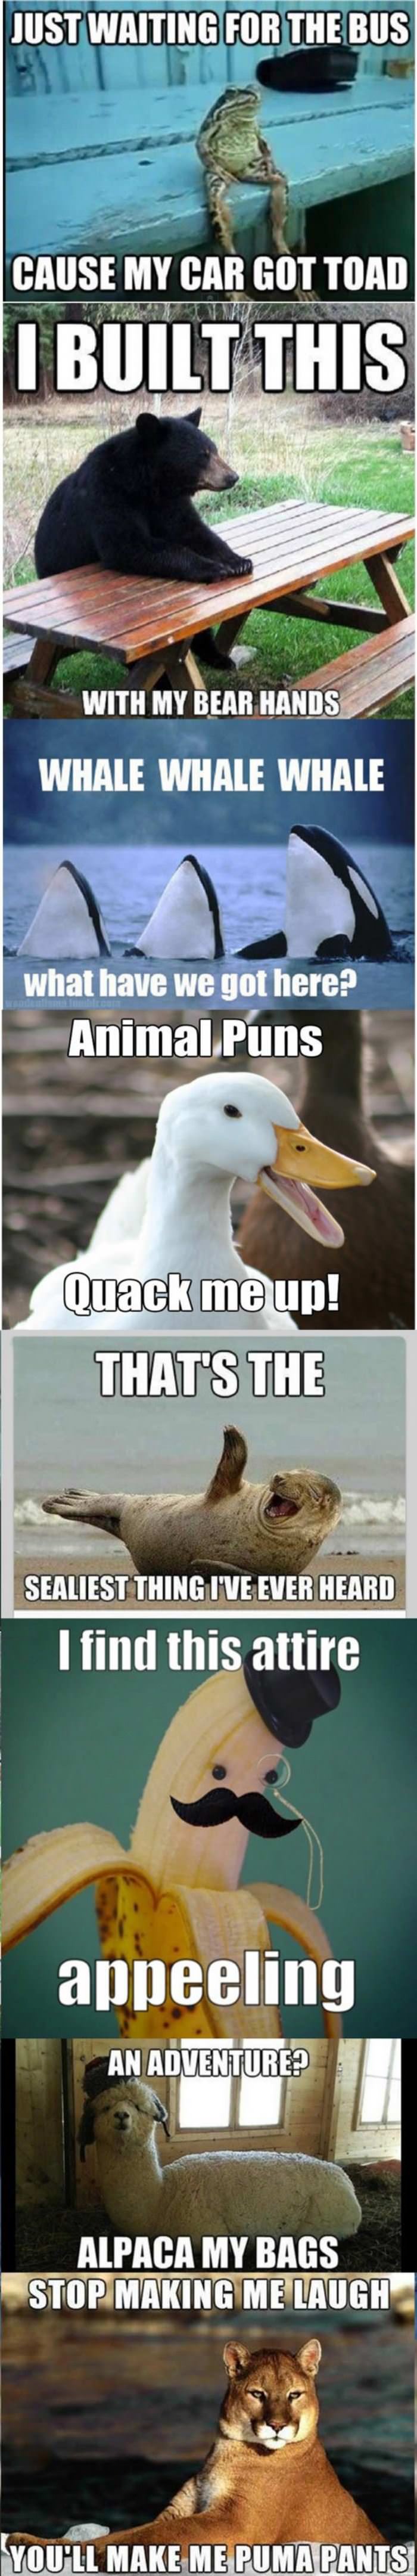 some animal puns funny picture